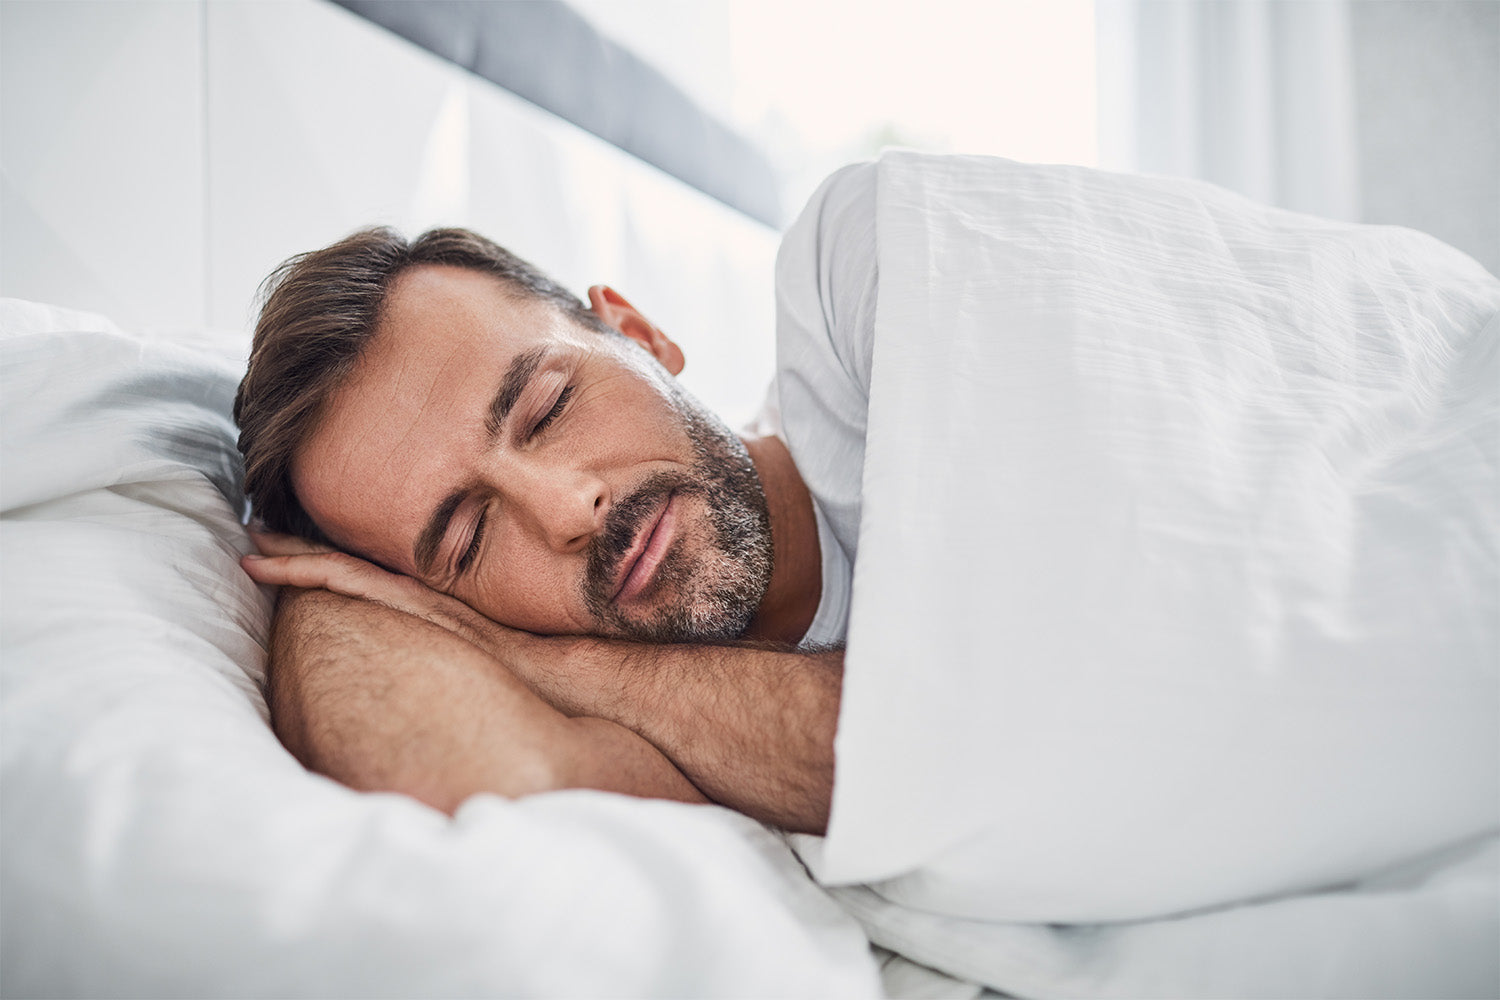 The Benefits of Sleep That No One Talks About